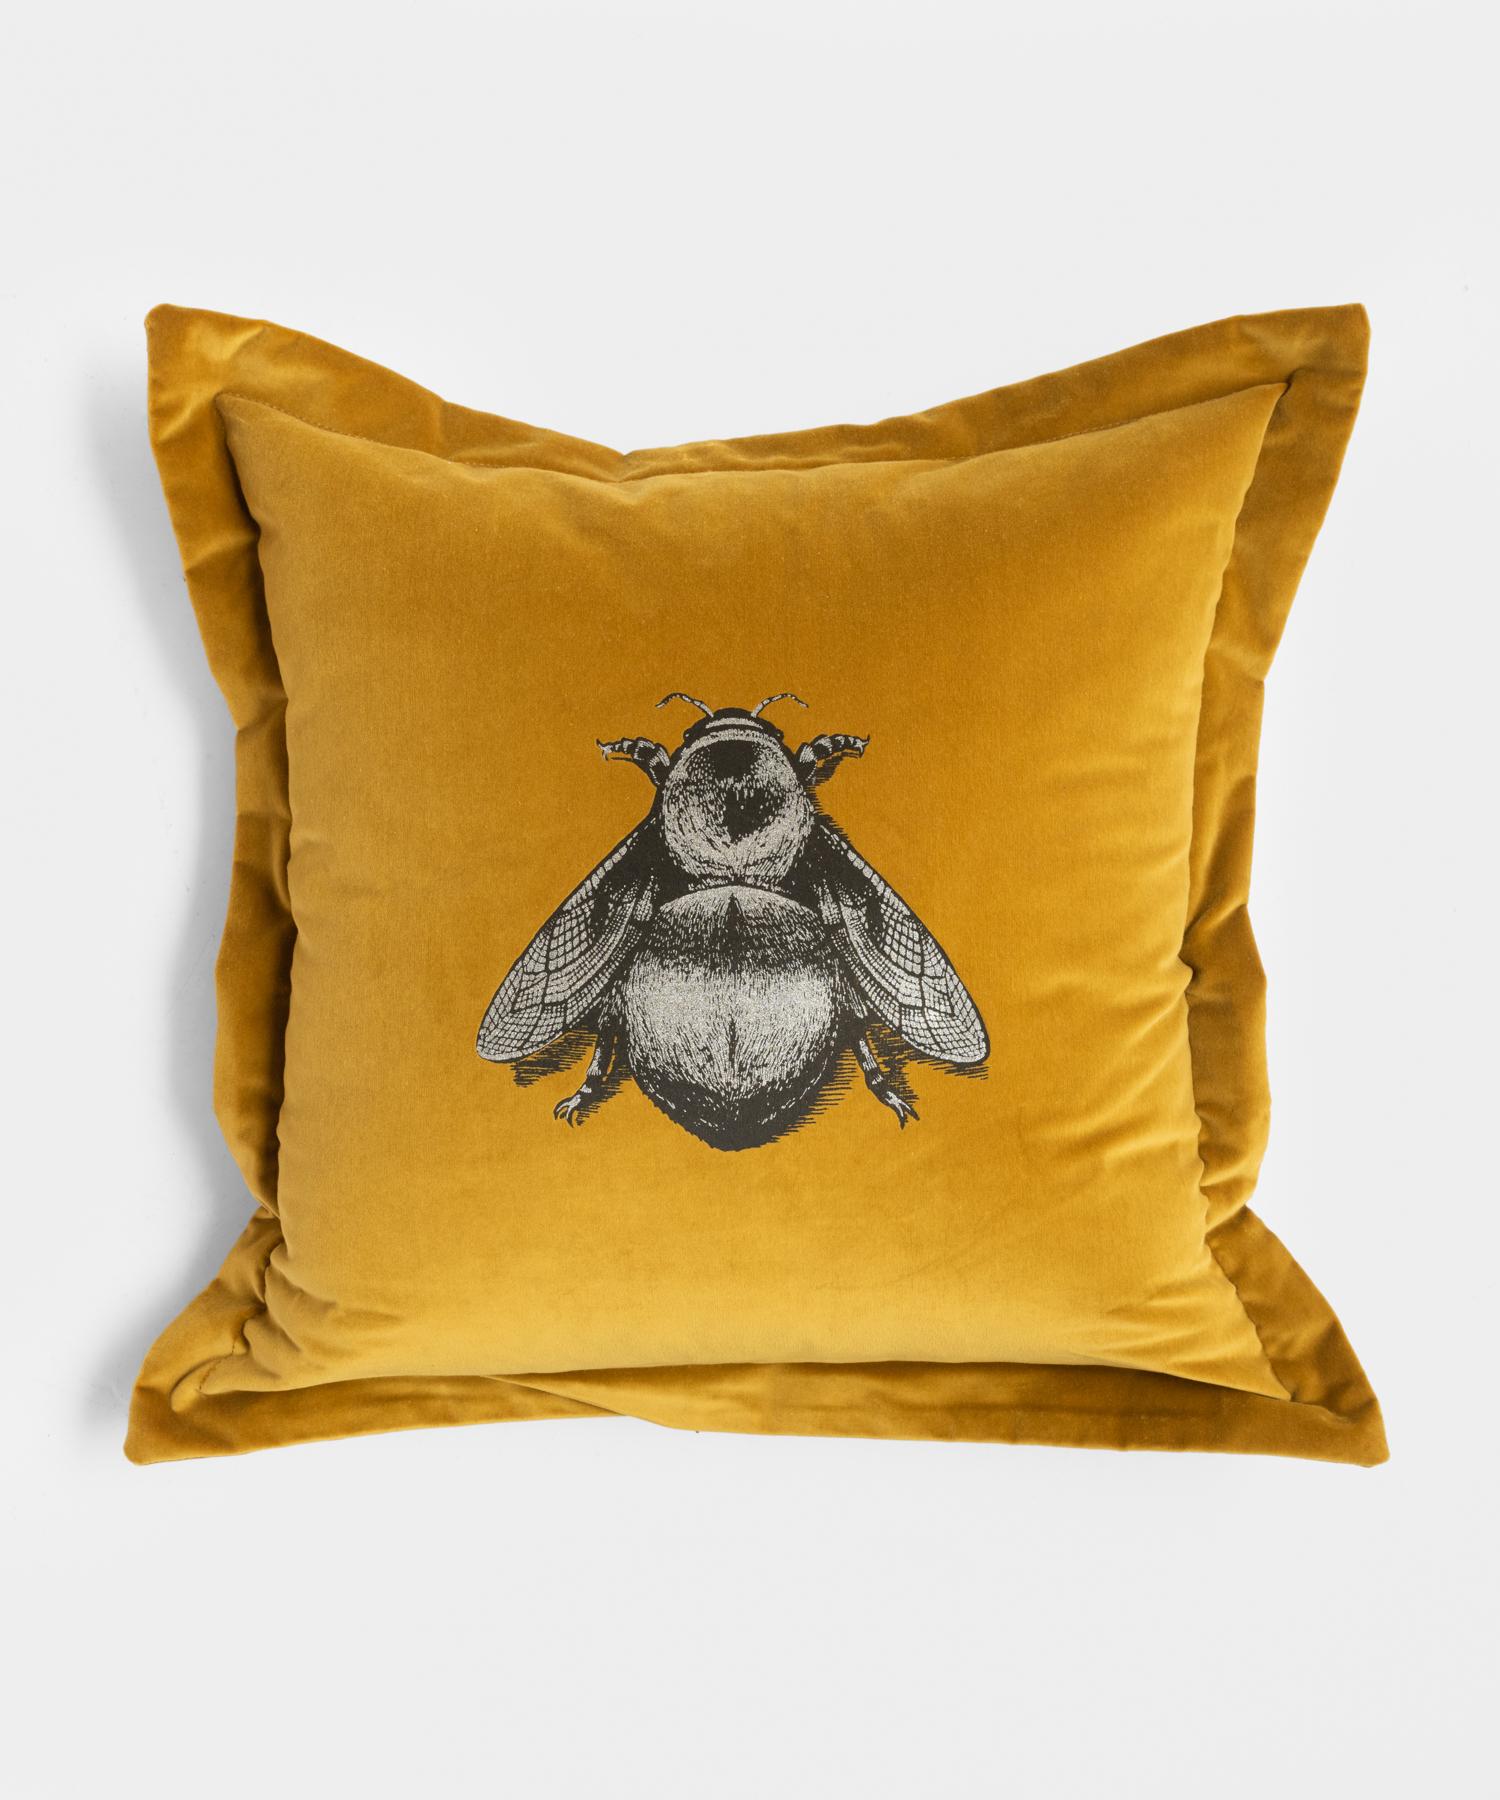 Honey Napoleon Bee cushion by Timorous Beasties

100% cotton pile with embroidered bee design in metallic thread. Also available in olive and crimson.